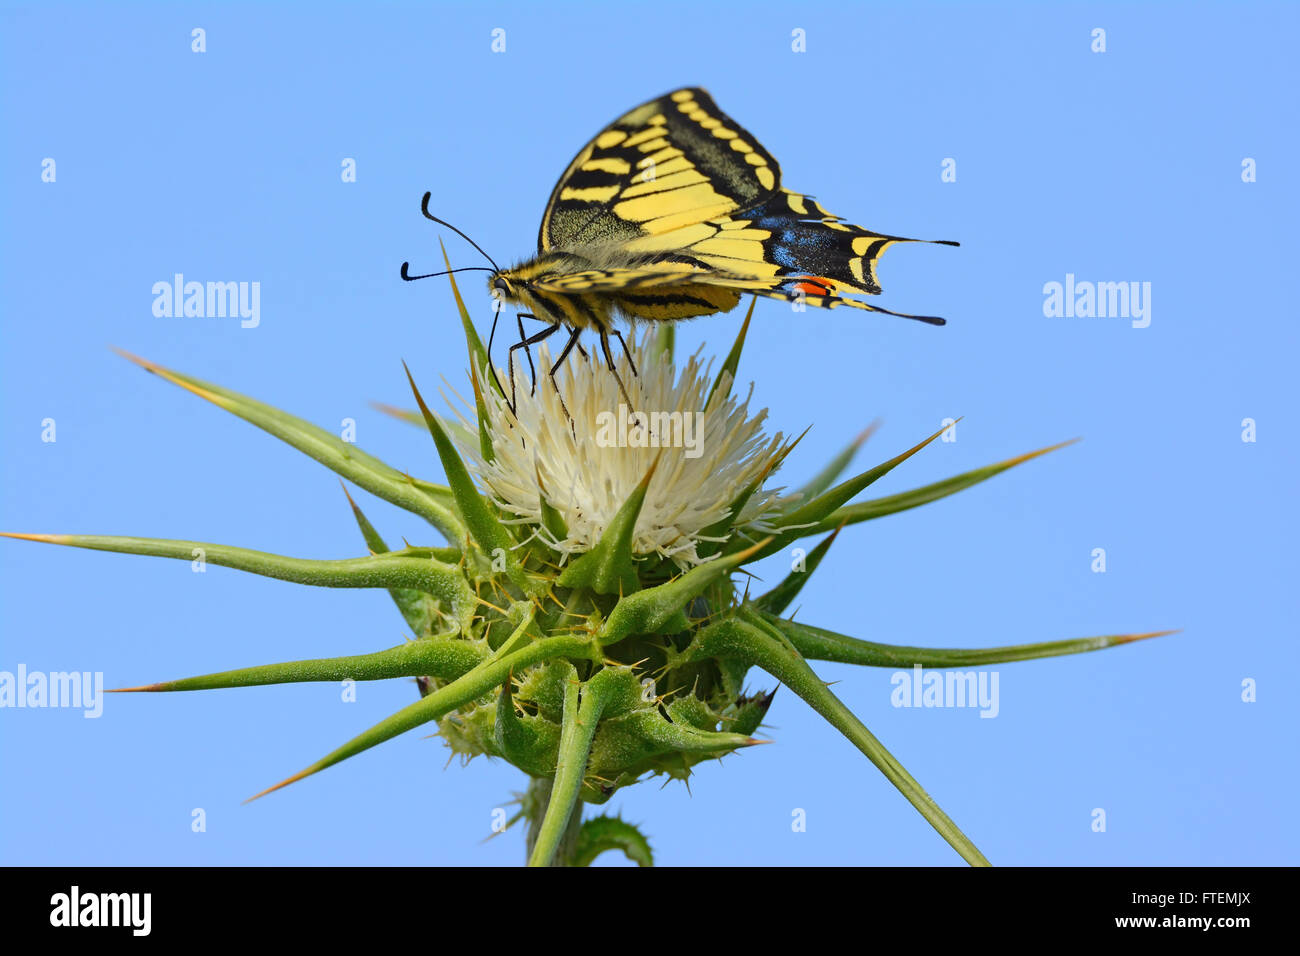 Swallowtail butterfly - Papilio machaon - on a thorn flower Stock Photo